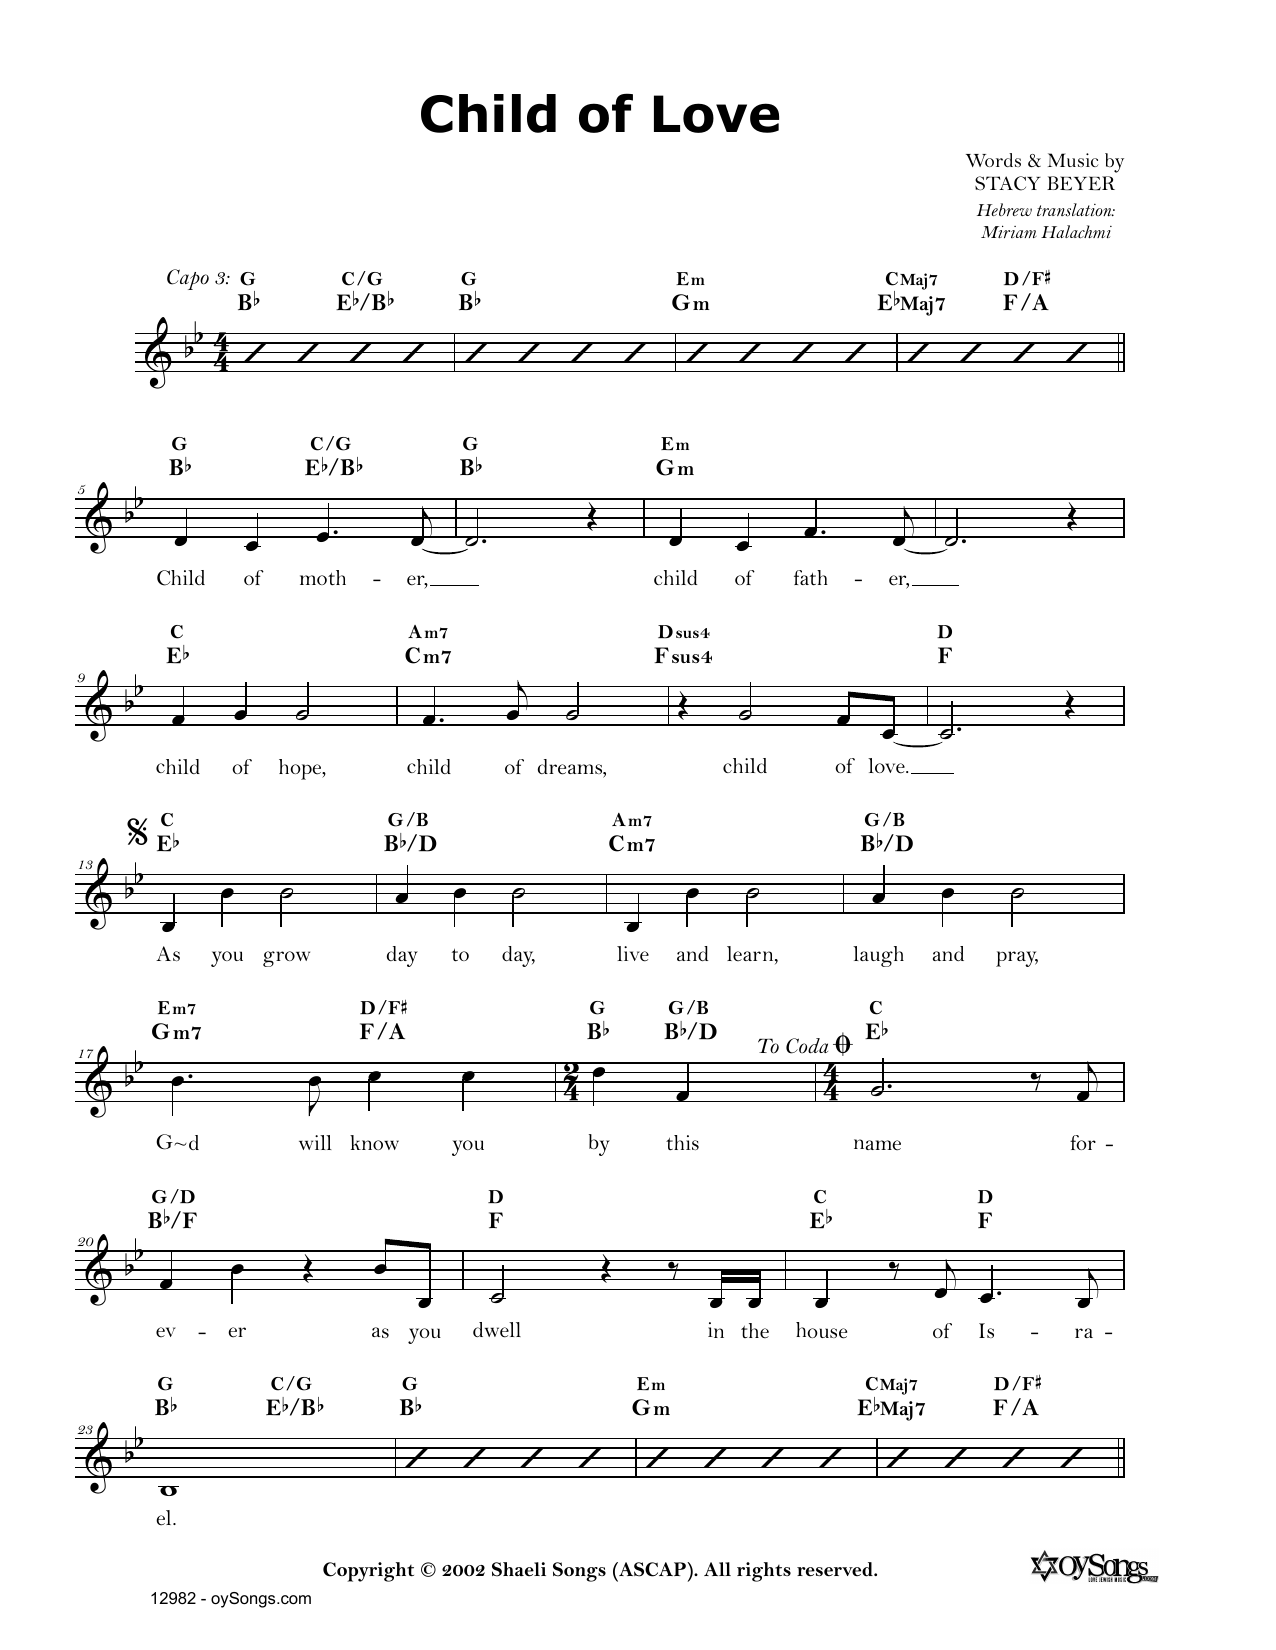 Download Stacy Beyer Child of Love Sheet Music